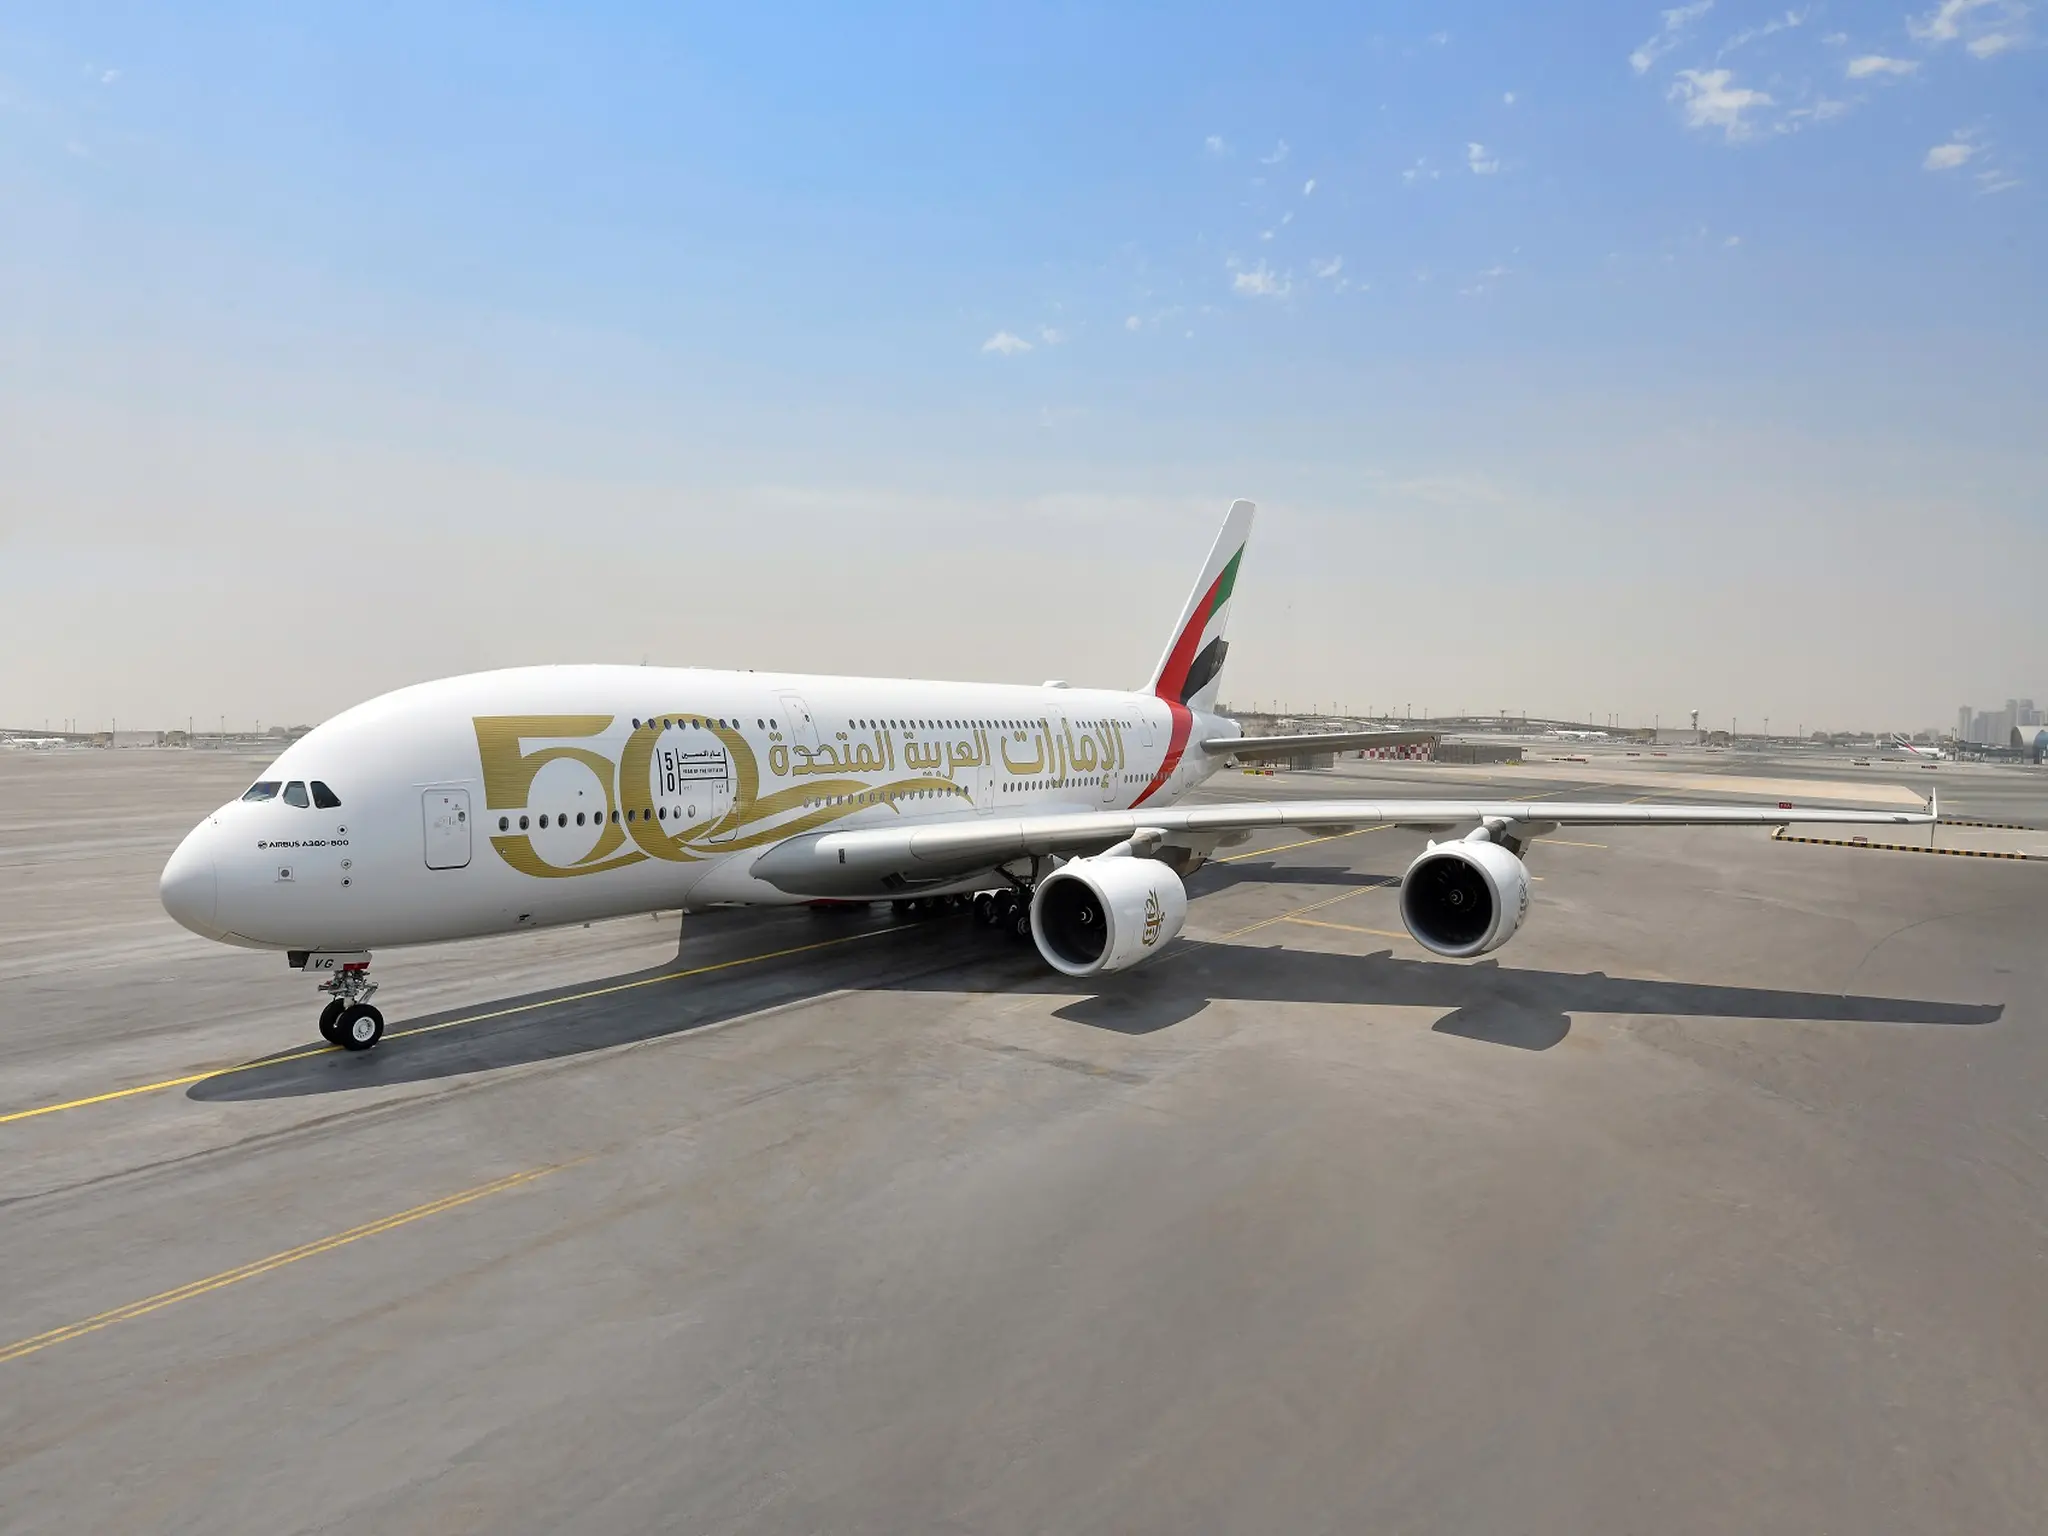 Urgent statement from "Emirates Airlines" and implementation on Wednesday